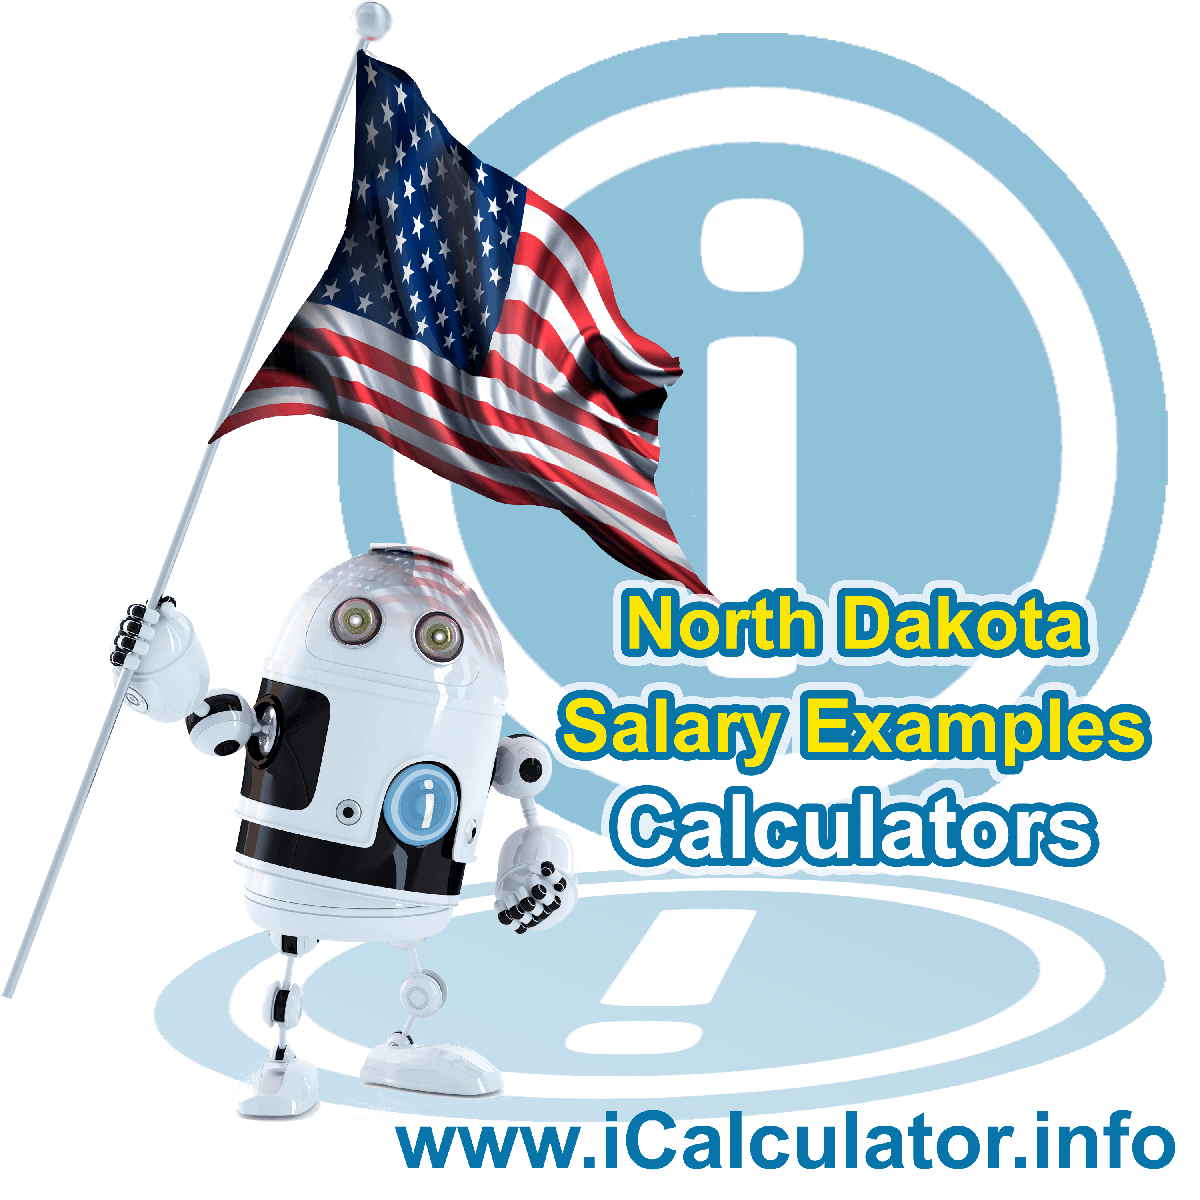 North Dakota Salary Example for $ 80,000.00 in 2023 | iCalculator™ | $ 80,000.00 salary example for employee and employer paying North Dakota State tincome taxes. Detailed salary after tax calculation including North Dakota State Tax, Federal State Tax, Medicare Deductions, Social Security, Capital Gains and other income tax and salary deductions complete with supporting North Dakota state tax tables 